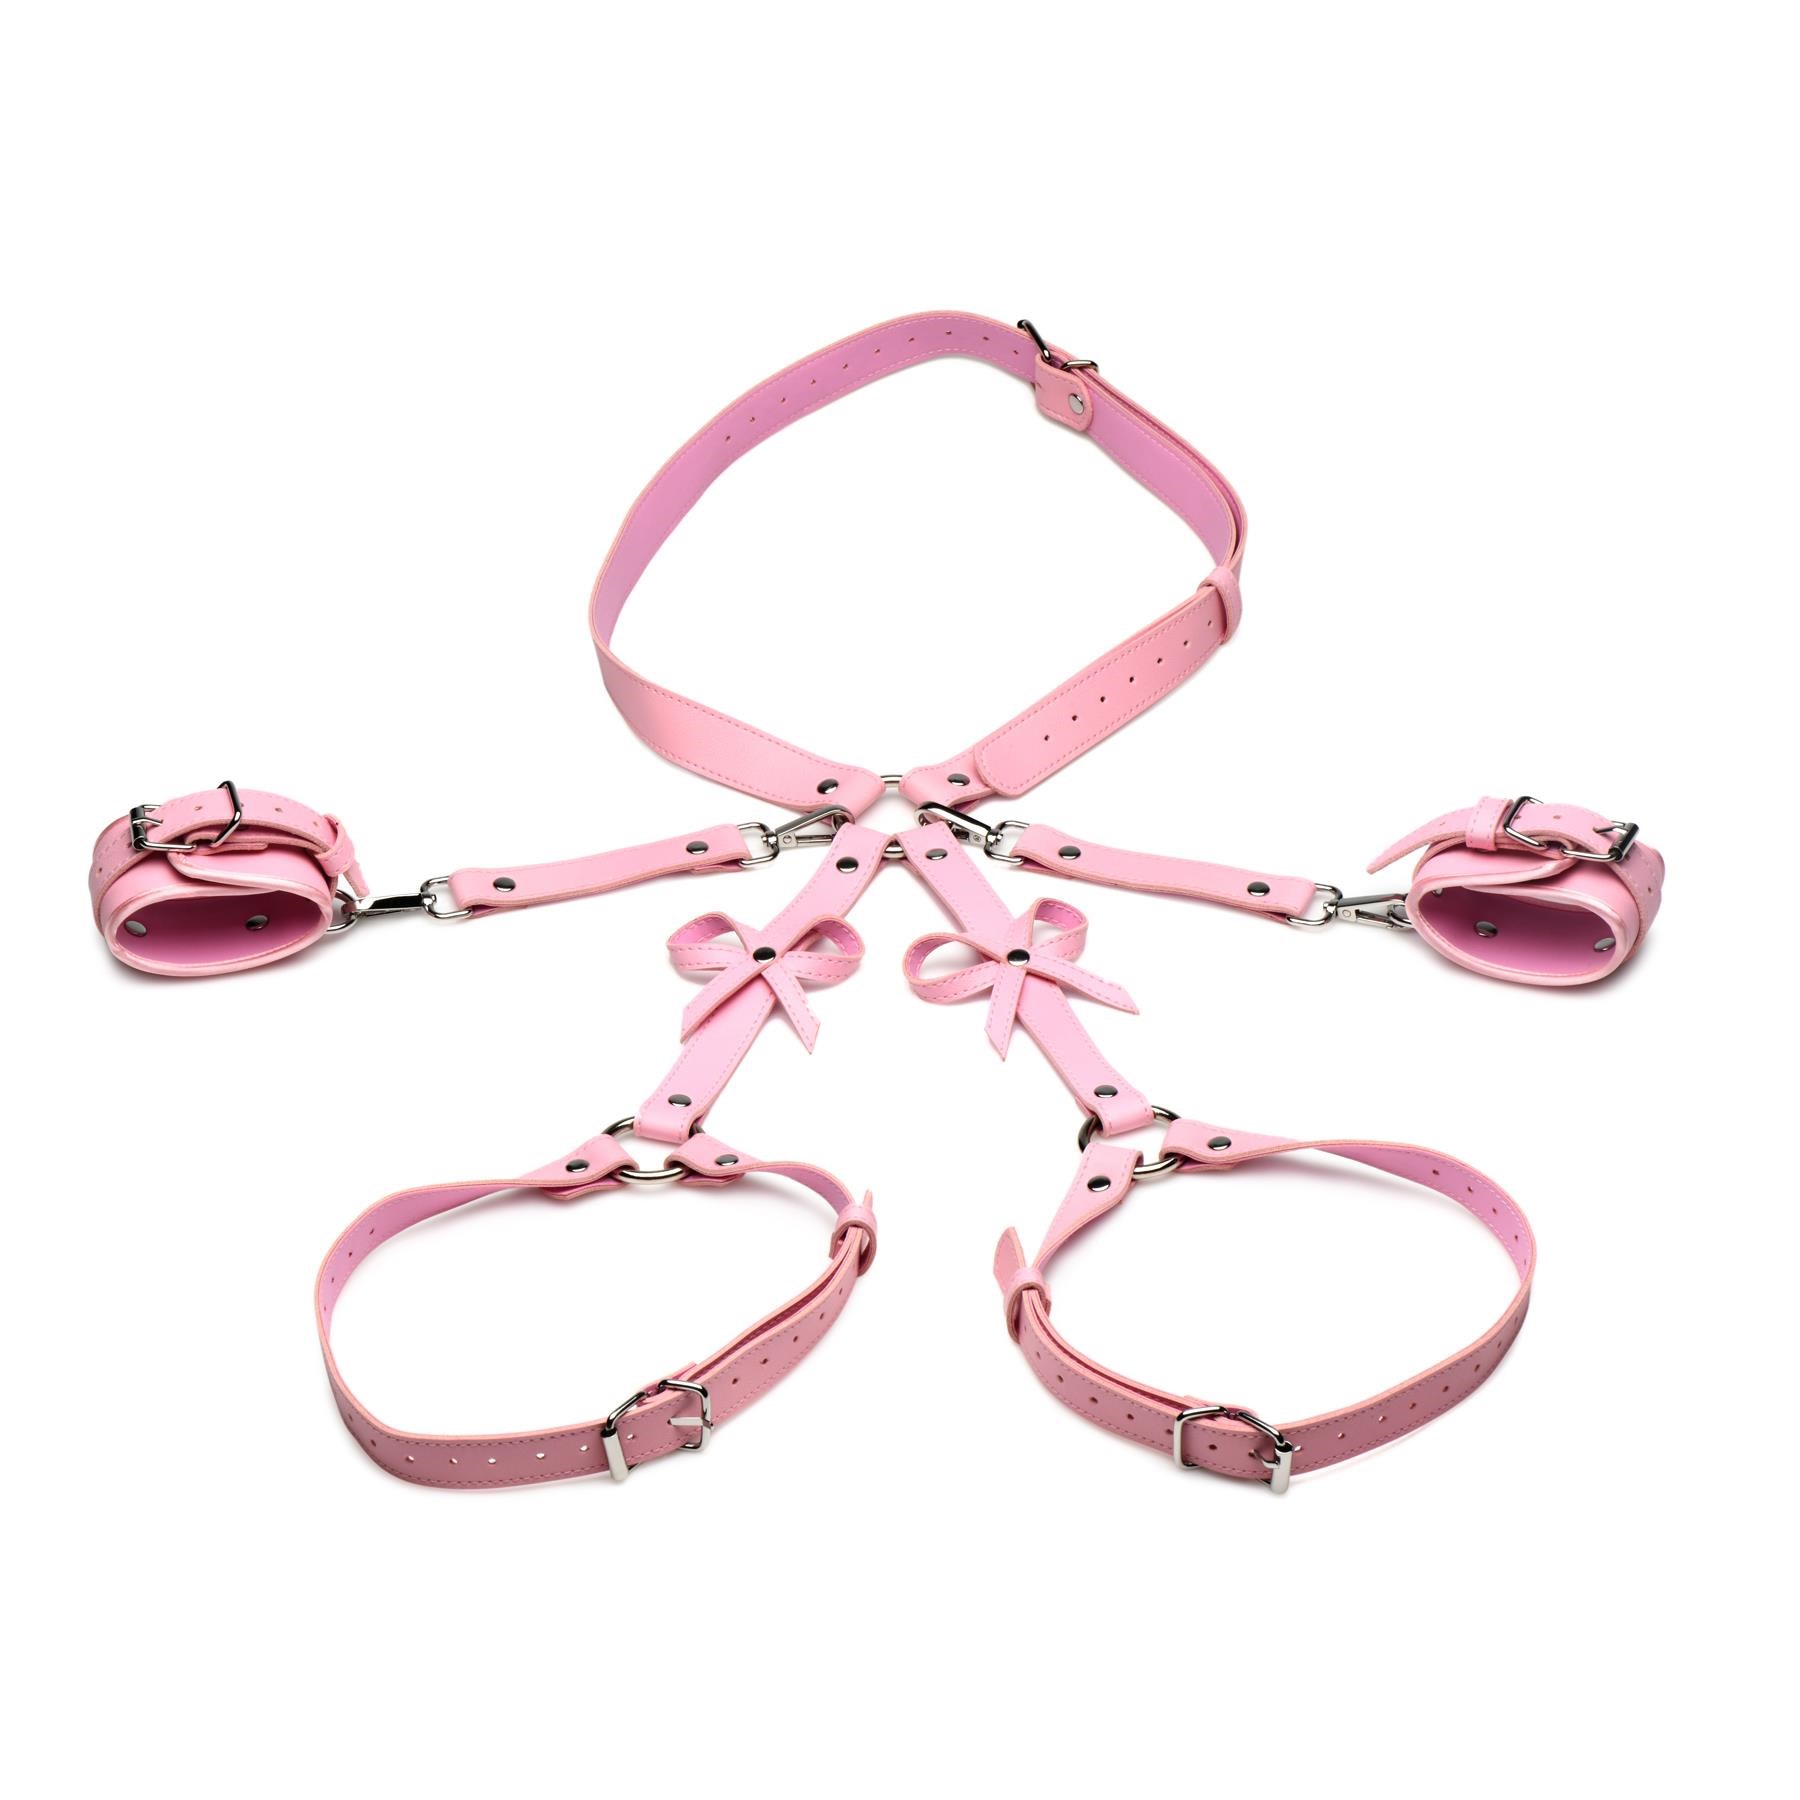 Strict Bondage Harness With Bows - Table Top Product Shot